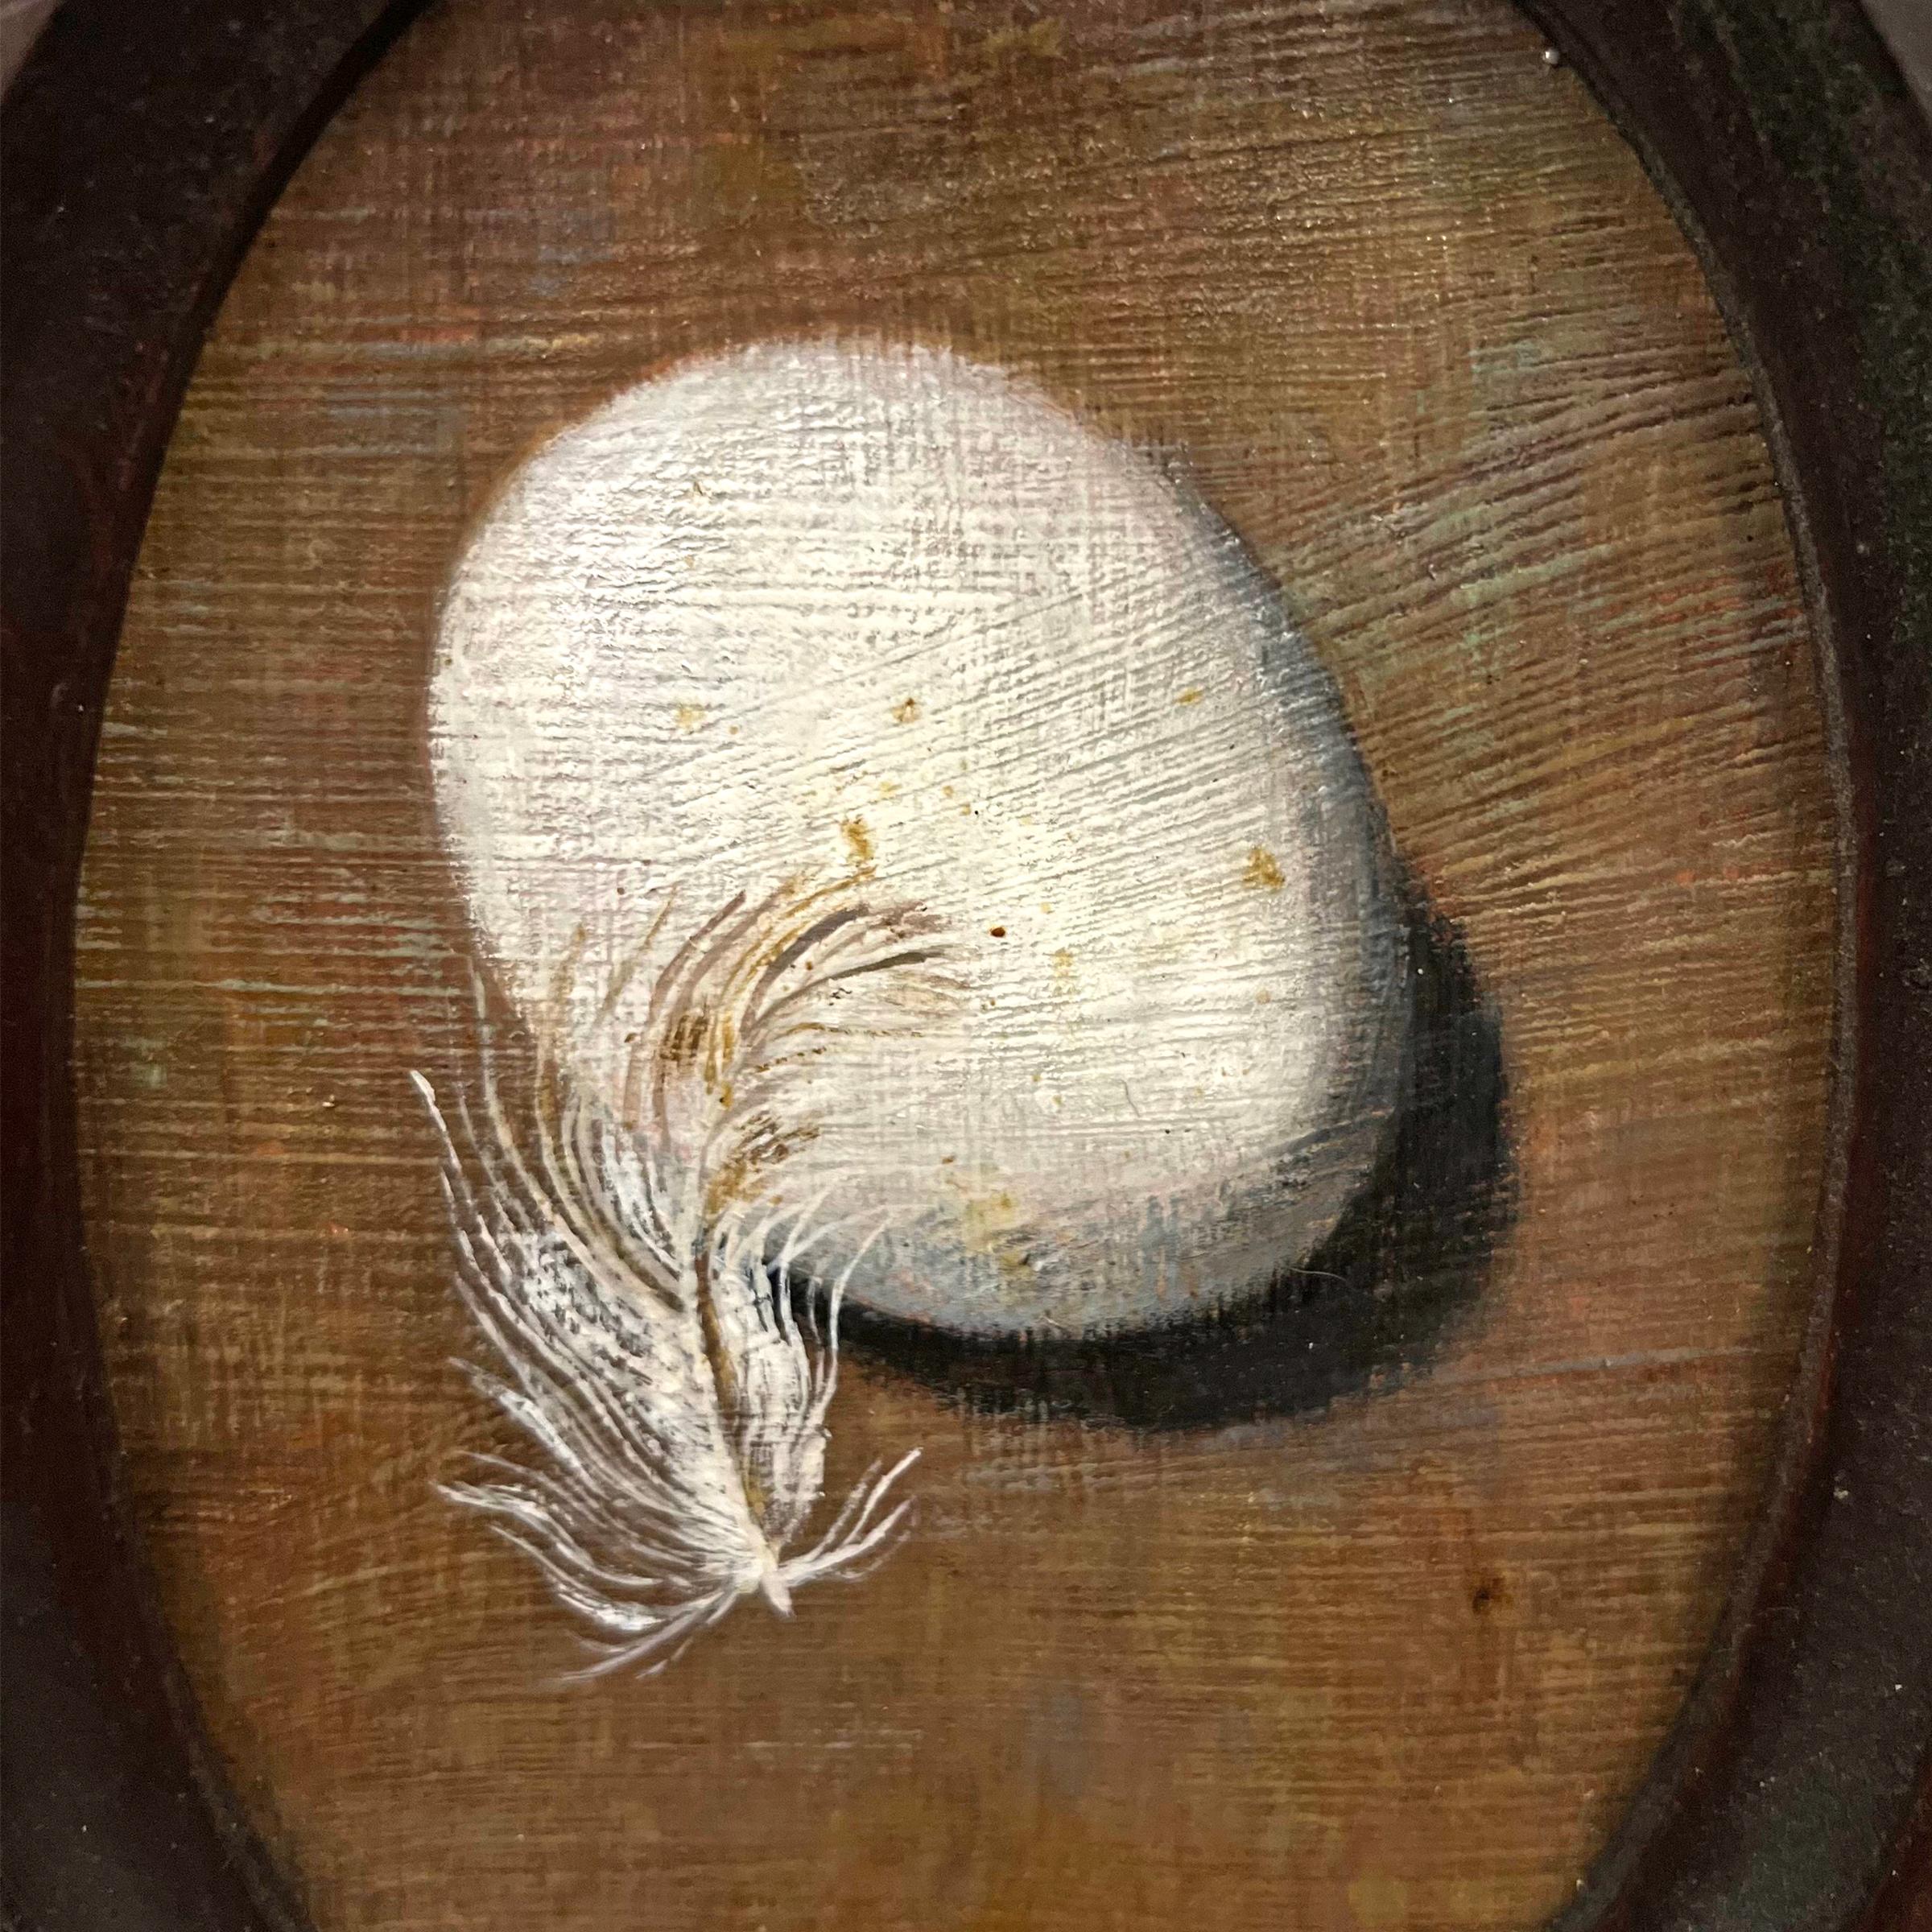 Hand-Painted Miniature Still Life Painting with Egg and Feather